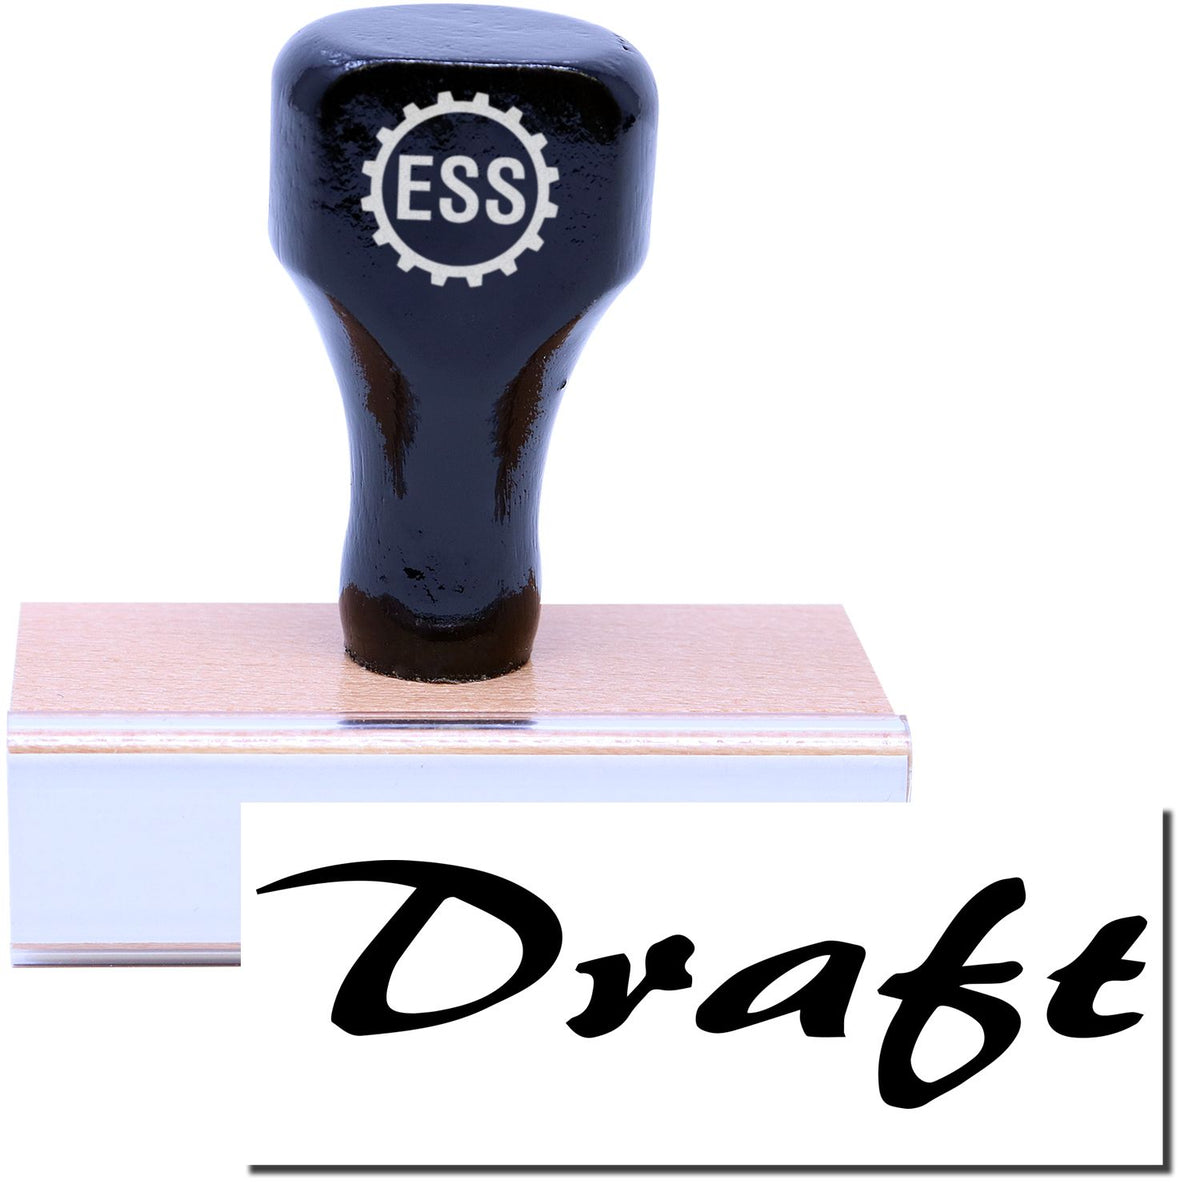 A stock office rubber stamp with a stamped image showing how the text &quot;Draft&quot; in a large cursive font is displayed after stamping.